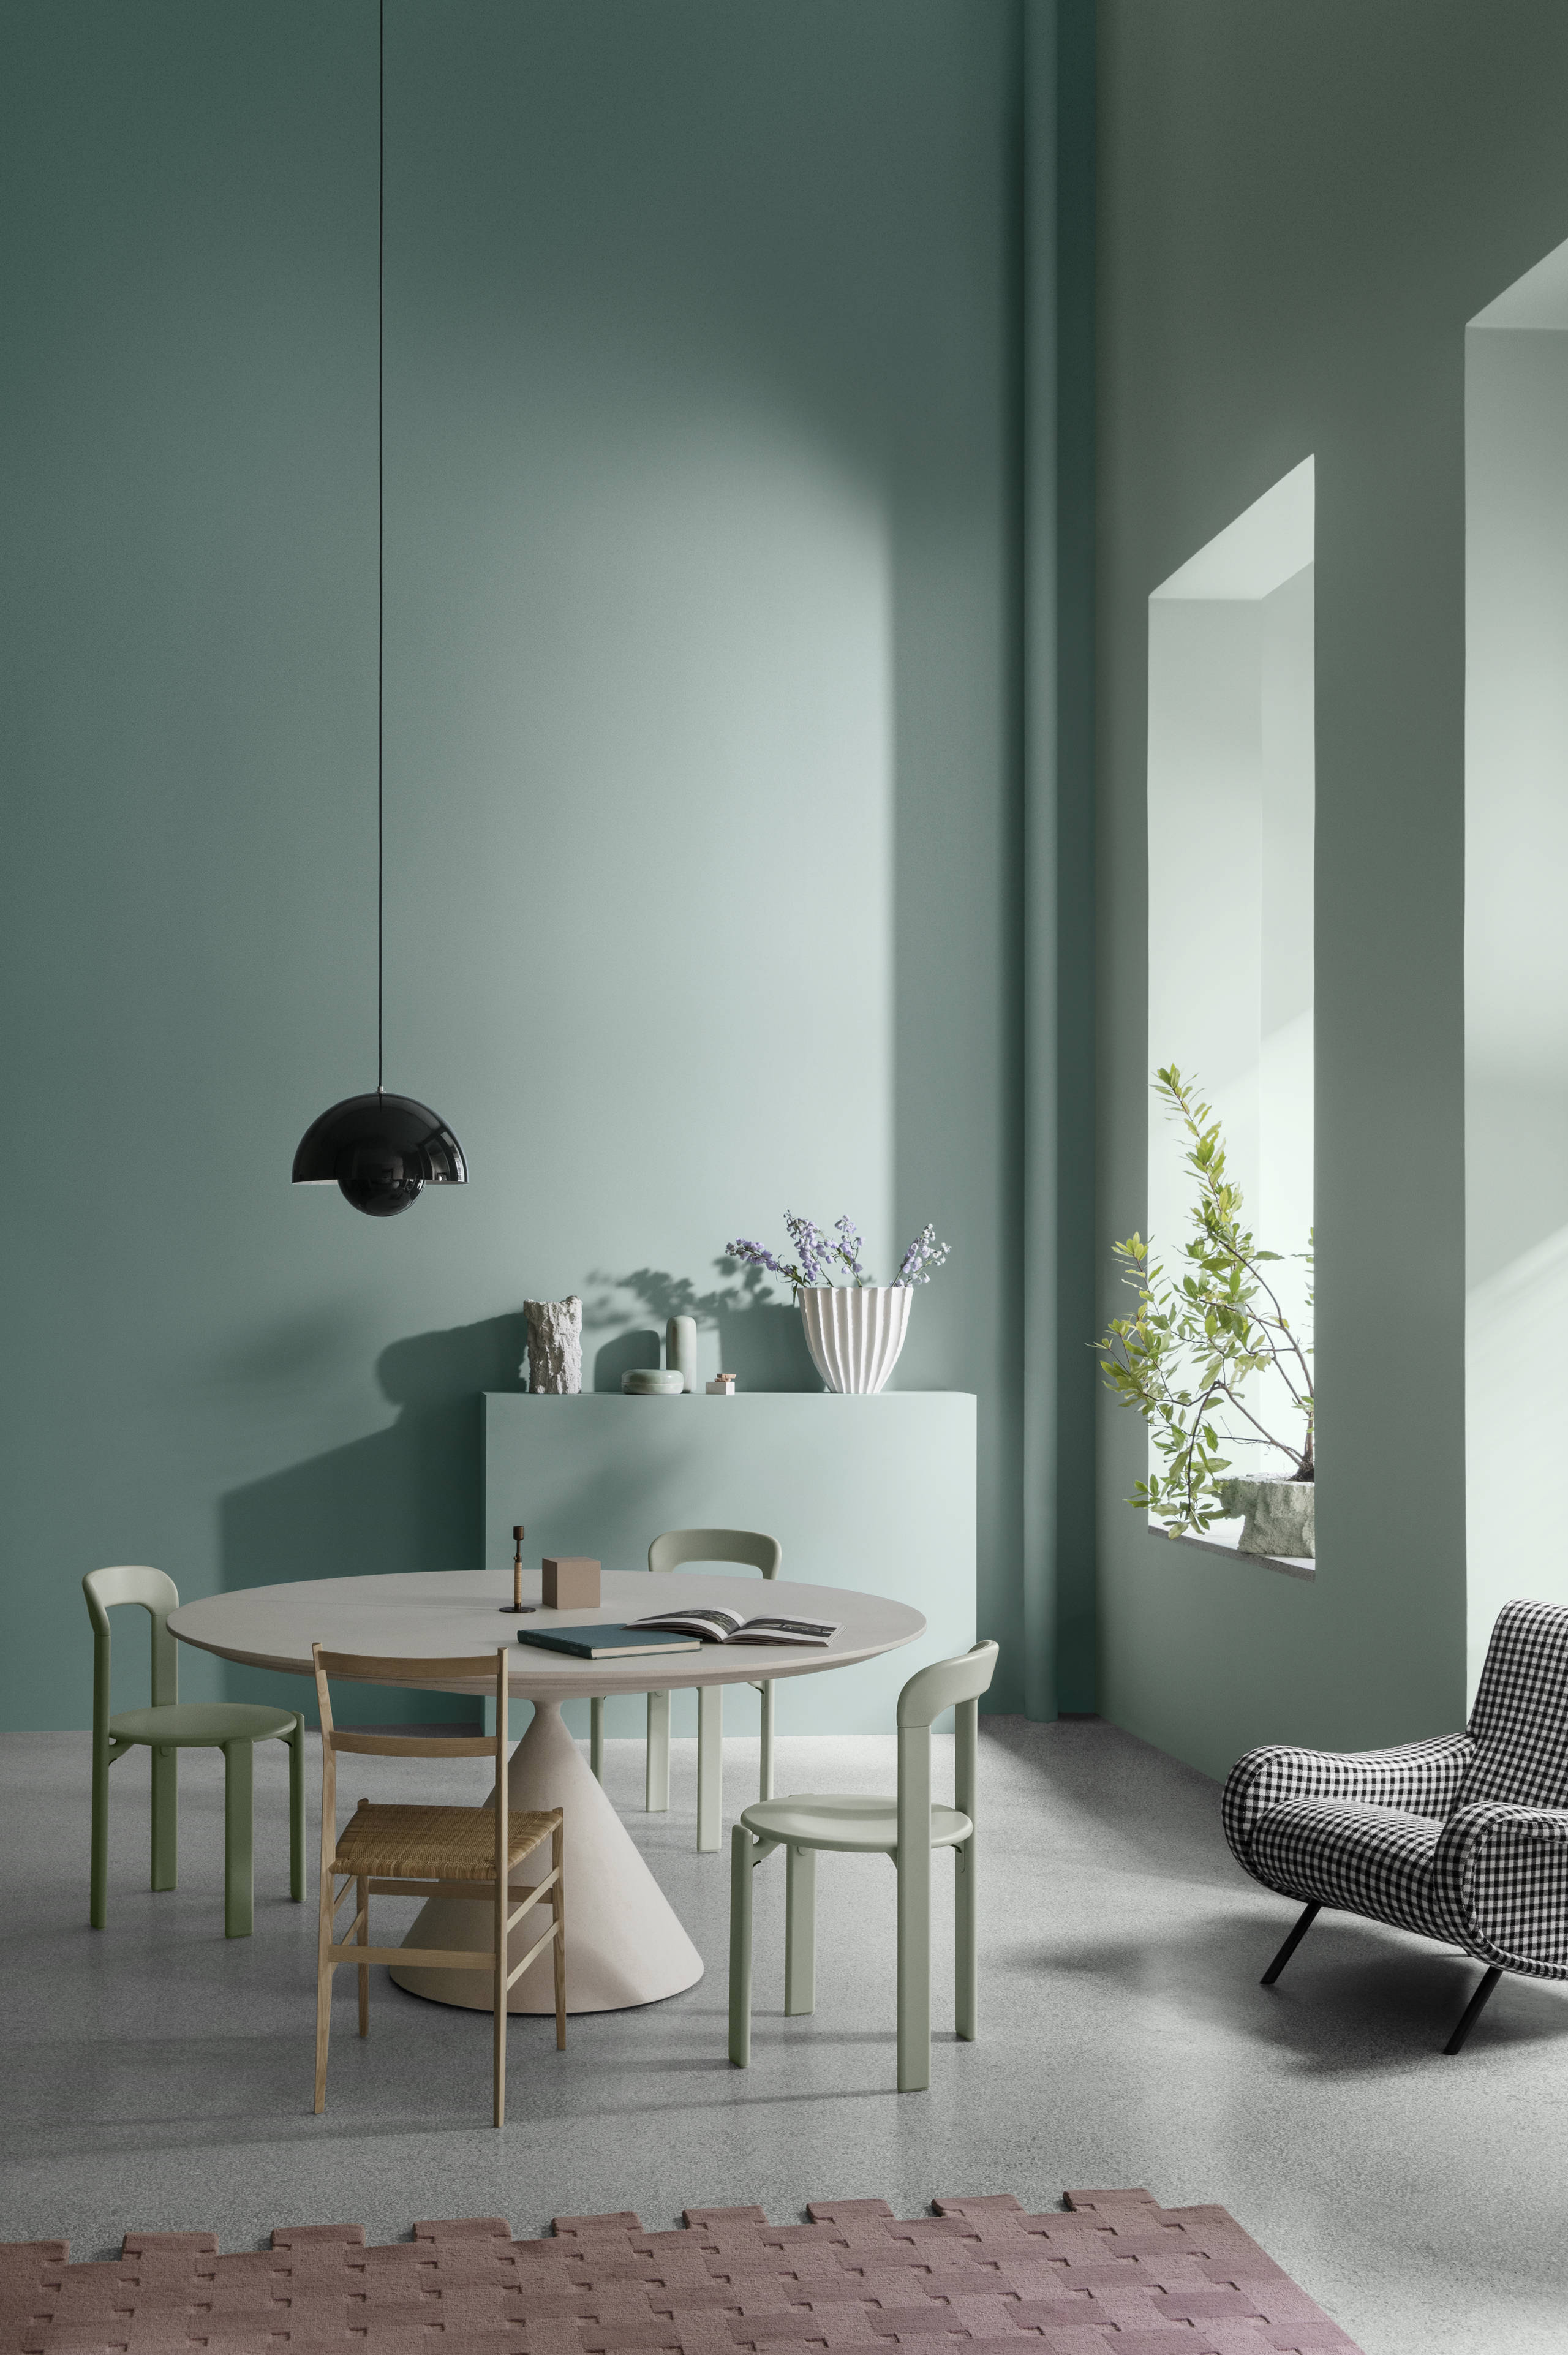 Dining area painted with Jotun Wish 6384 and Jotun Imagine 6383